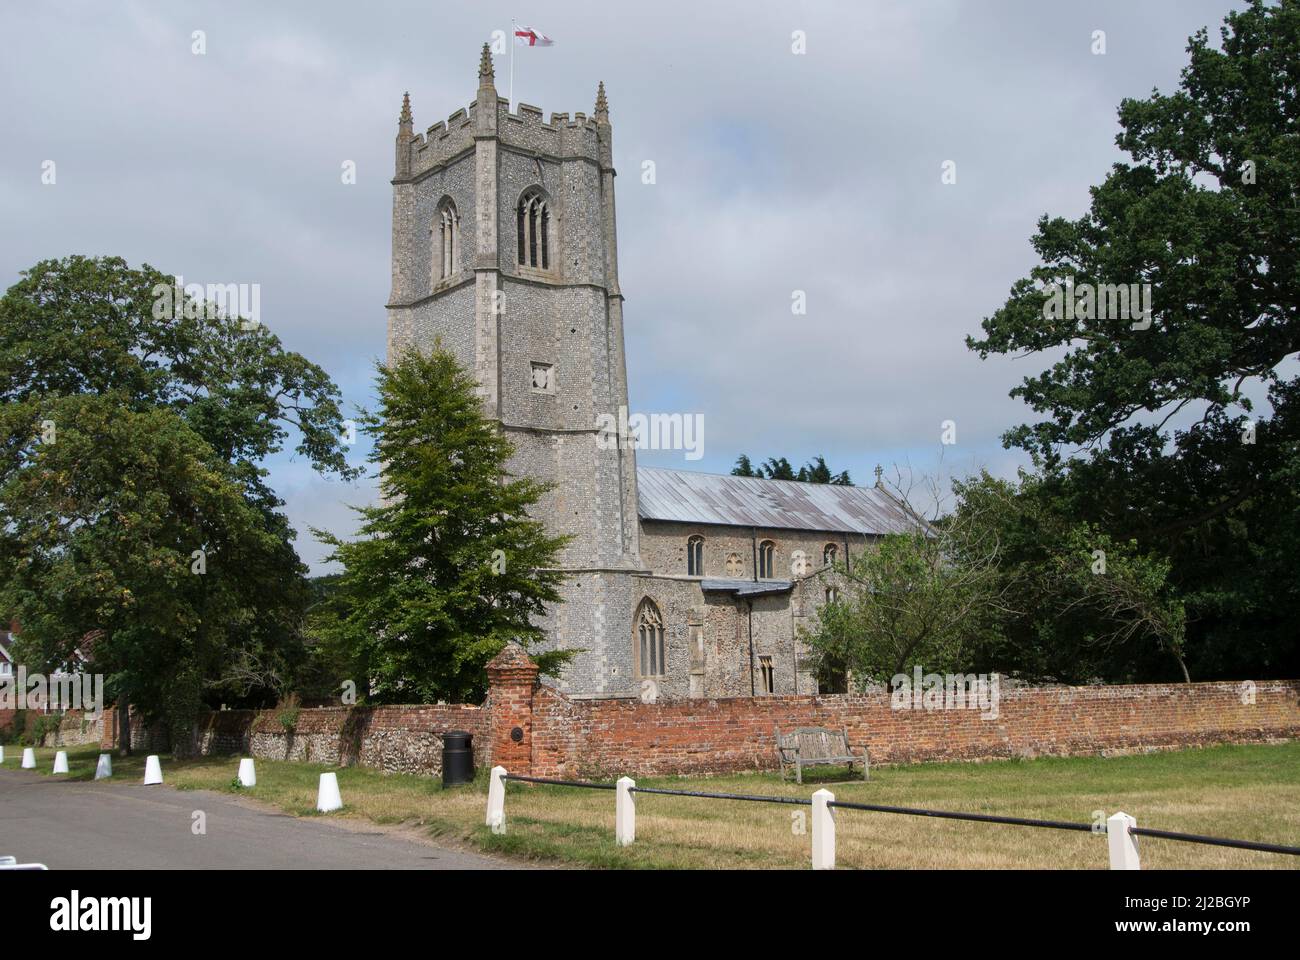 View of the church of St Peter and St Paul, Heydon Village, Norfolk, England Stock Photo